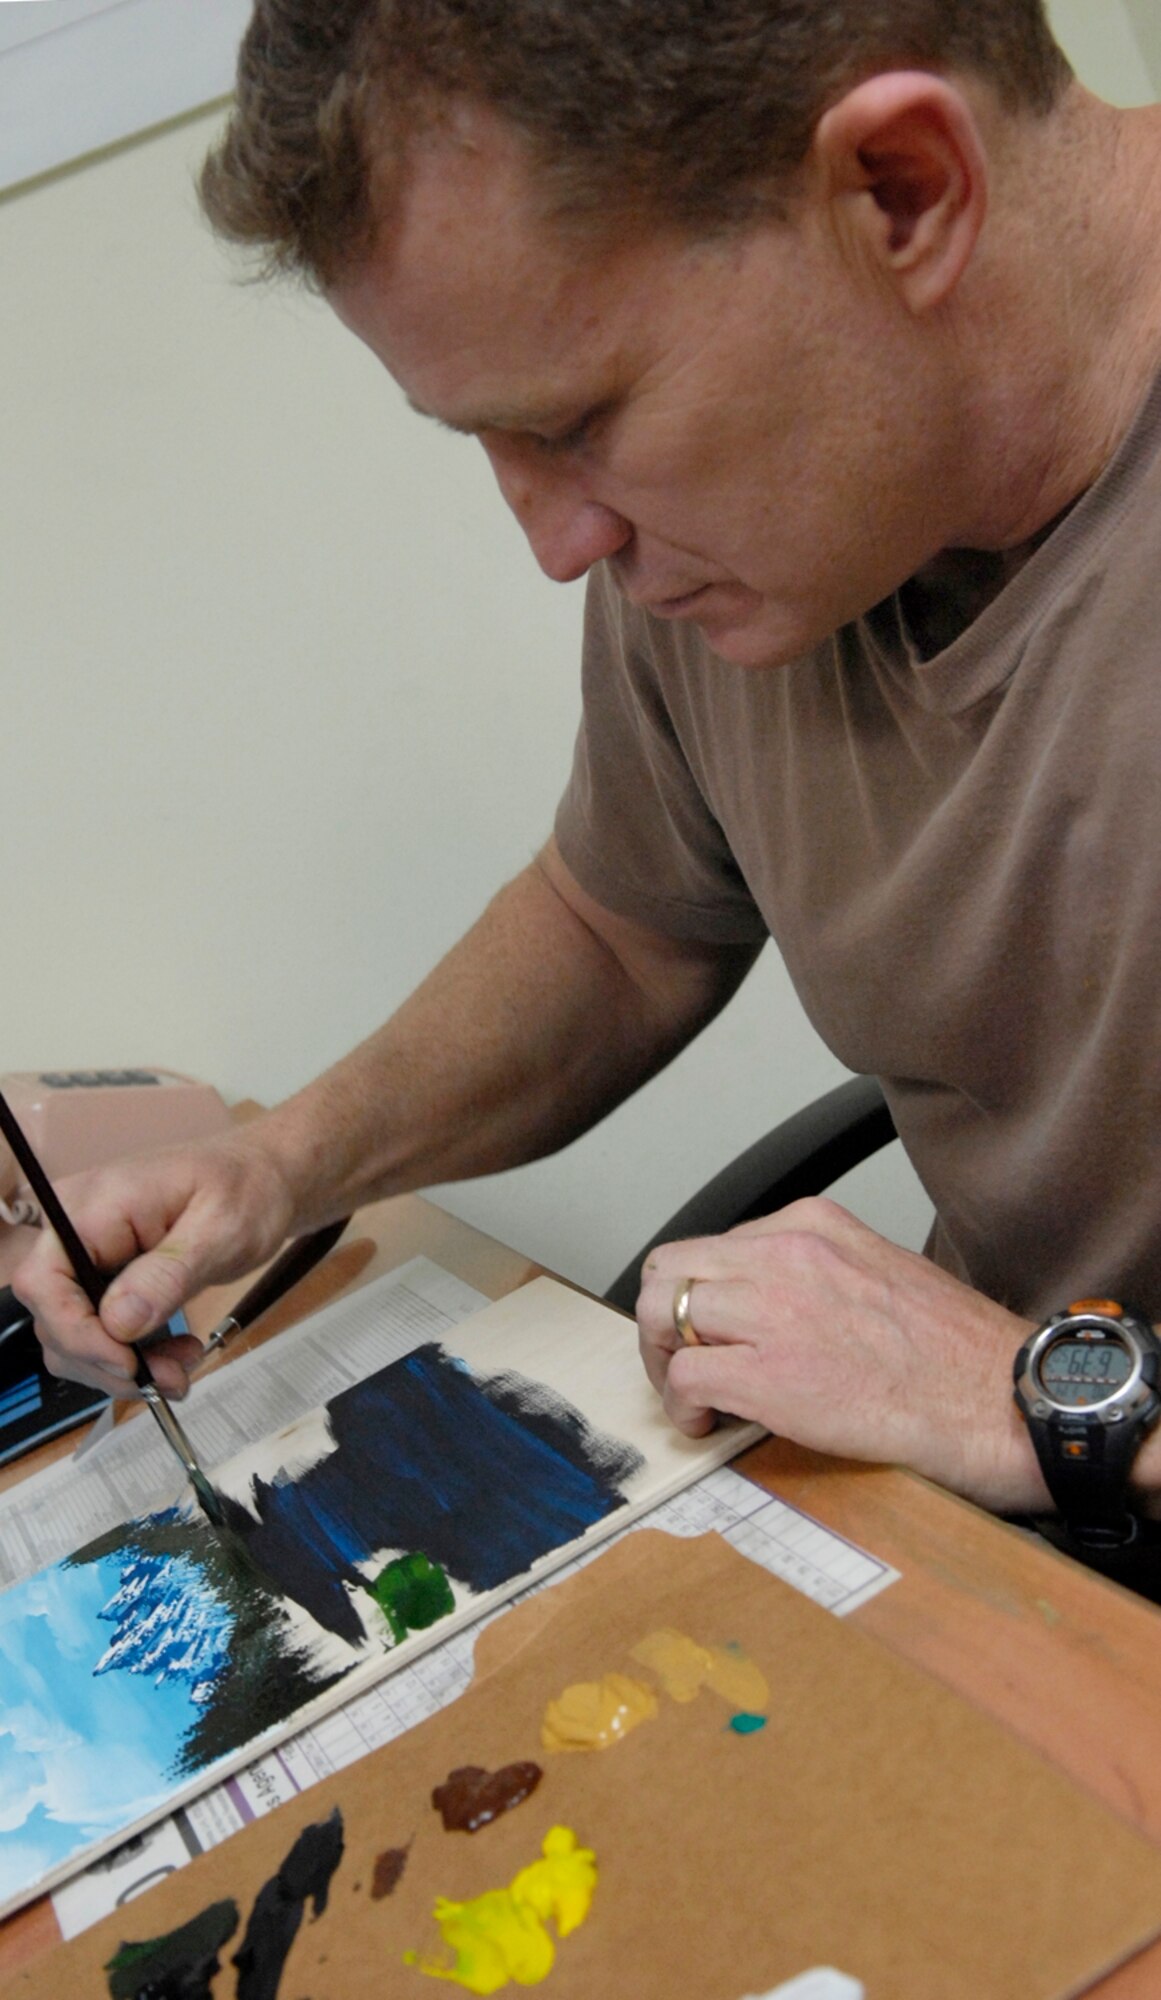 Tech. Sgt. Robert Sommers, 376th Expeditionary Civil Engineer Squadron, adds details to his painting.  Sergeant Sommers sells the paintings he creates from leftover wood scraps and donates the proceeds to a local heart foundation that helps pay for heart surgeries for children whose parents are unable to pay for the surgeries themselves.  (Air Force photo by Senior Airman Tabitha Kuykendall)
